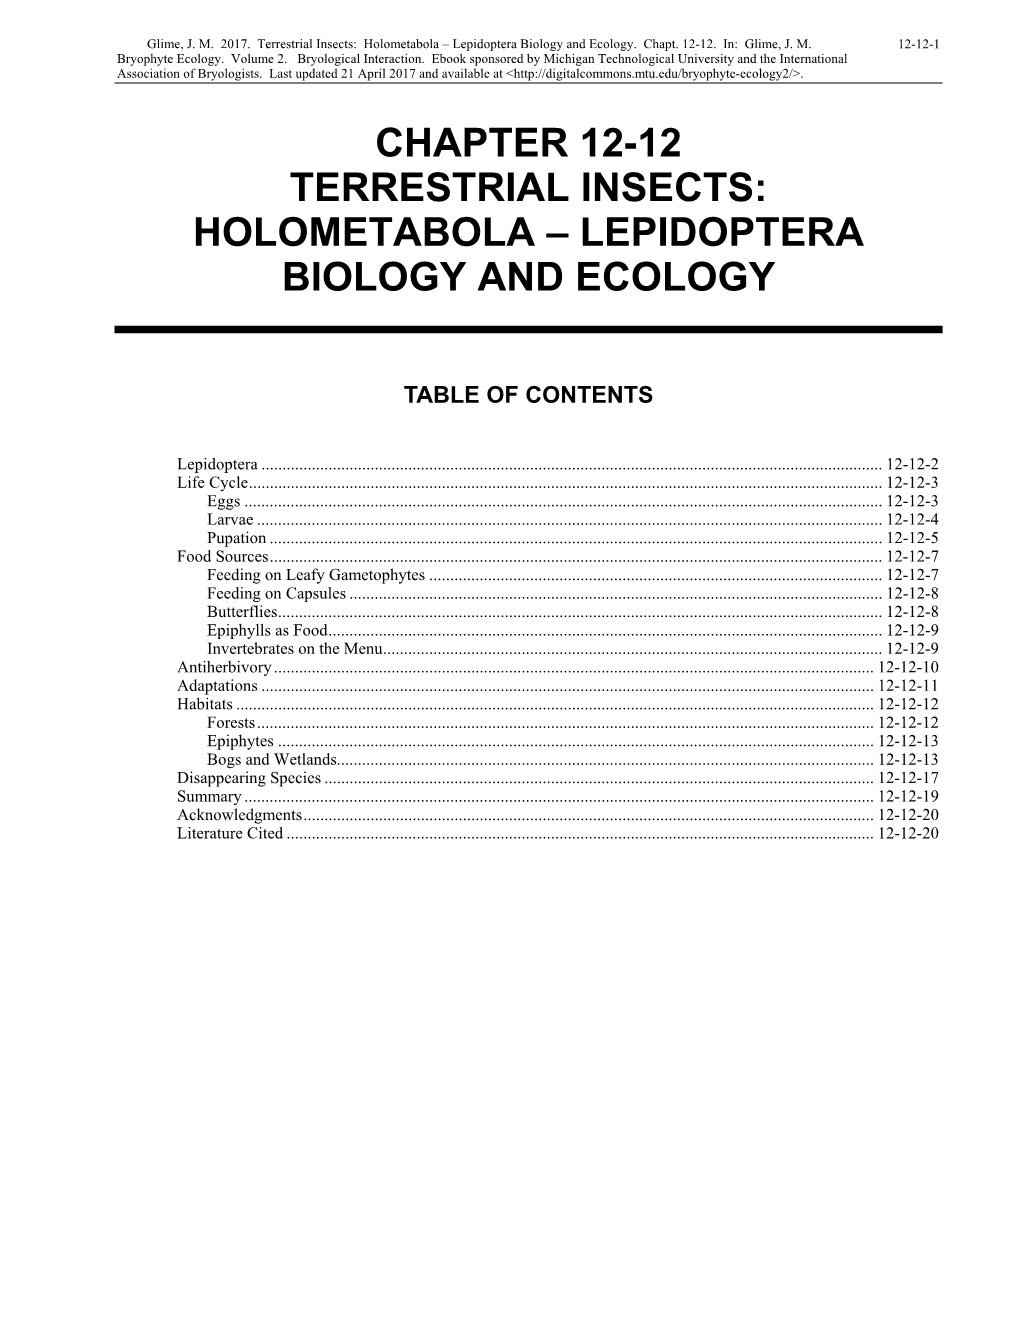 Terrestrial Insects: Holometabola – Lepidoptera Biology and Ecology